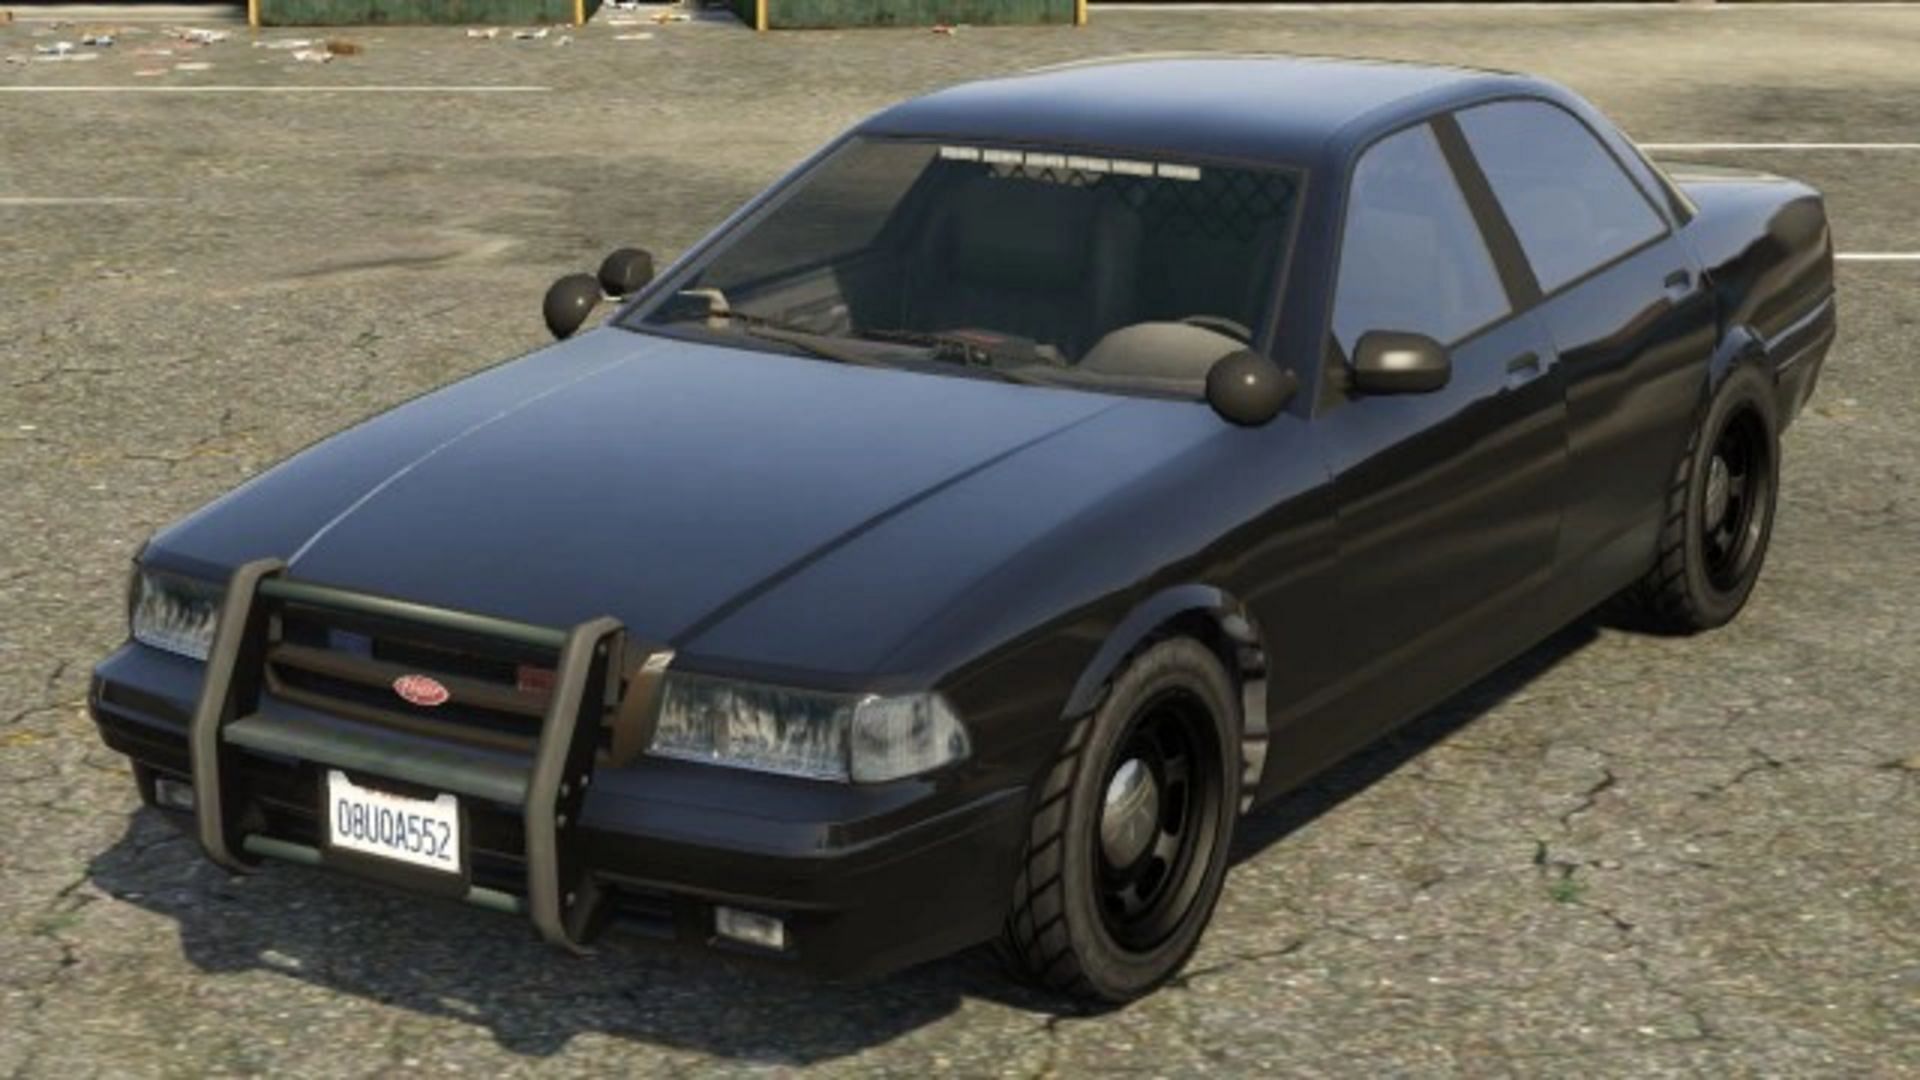 The Unmarked Cruiser in Grand Theft Auto Online (Image via Rockstar Games)